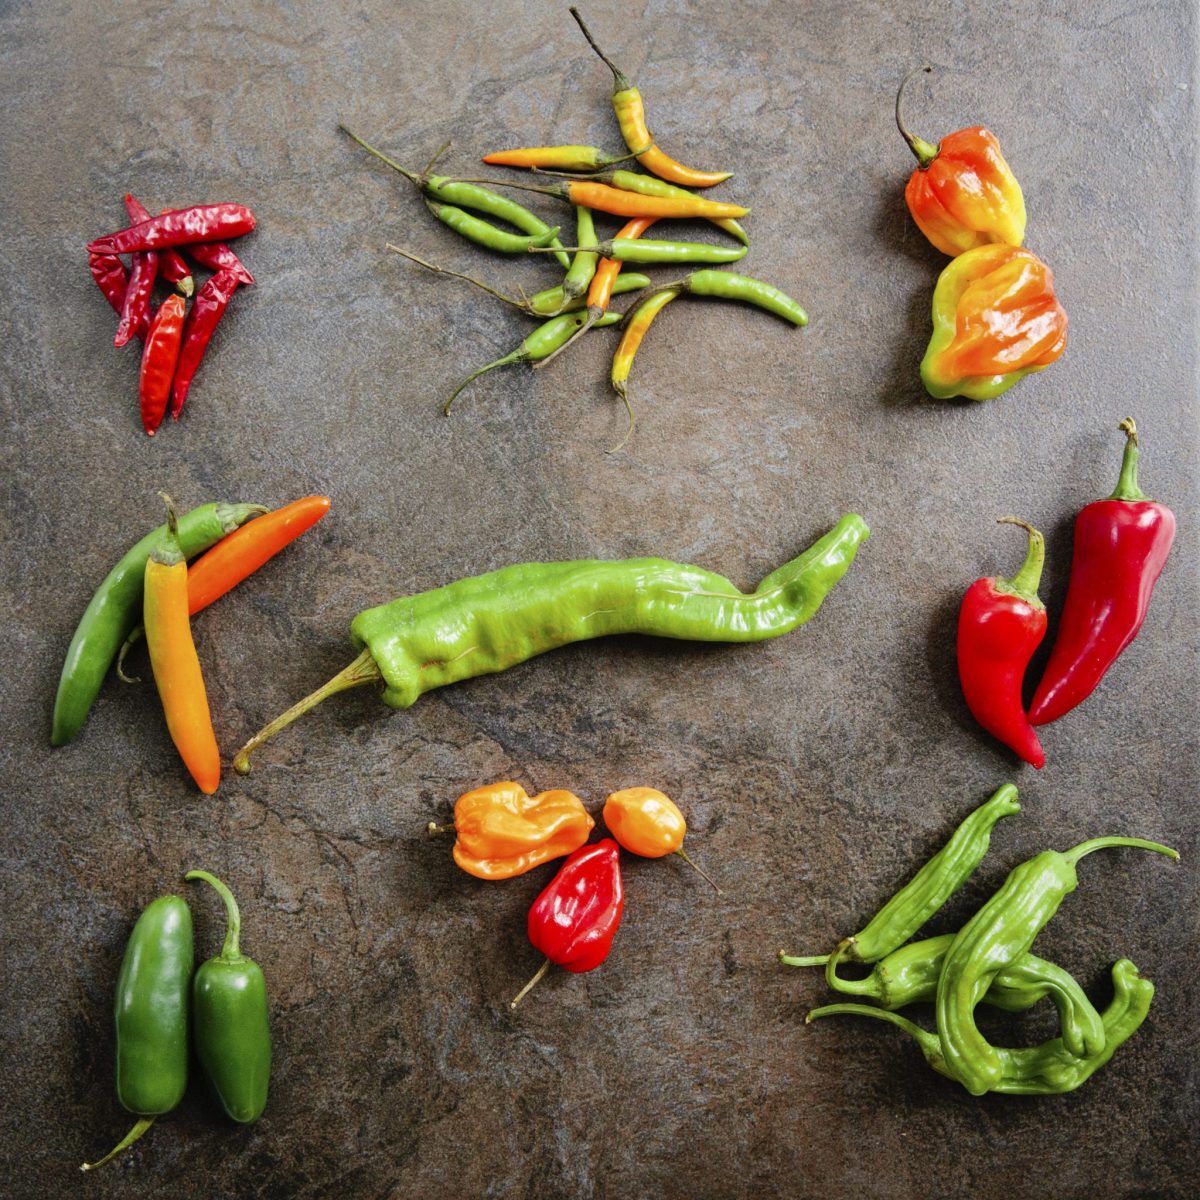 Assortment of mild to hot peppers